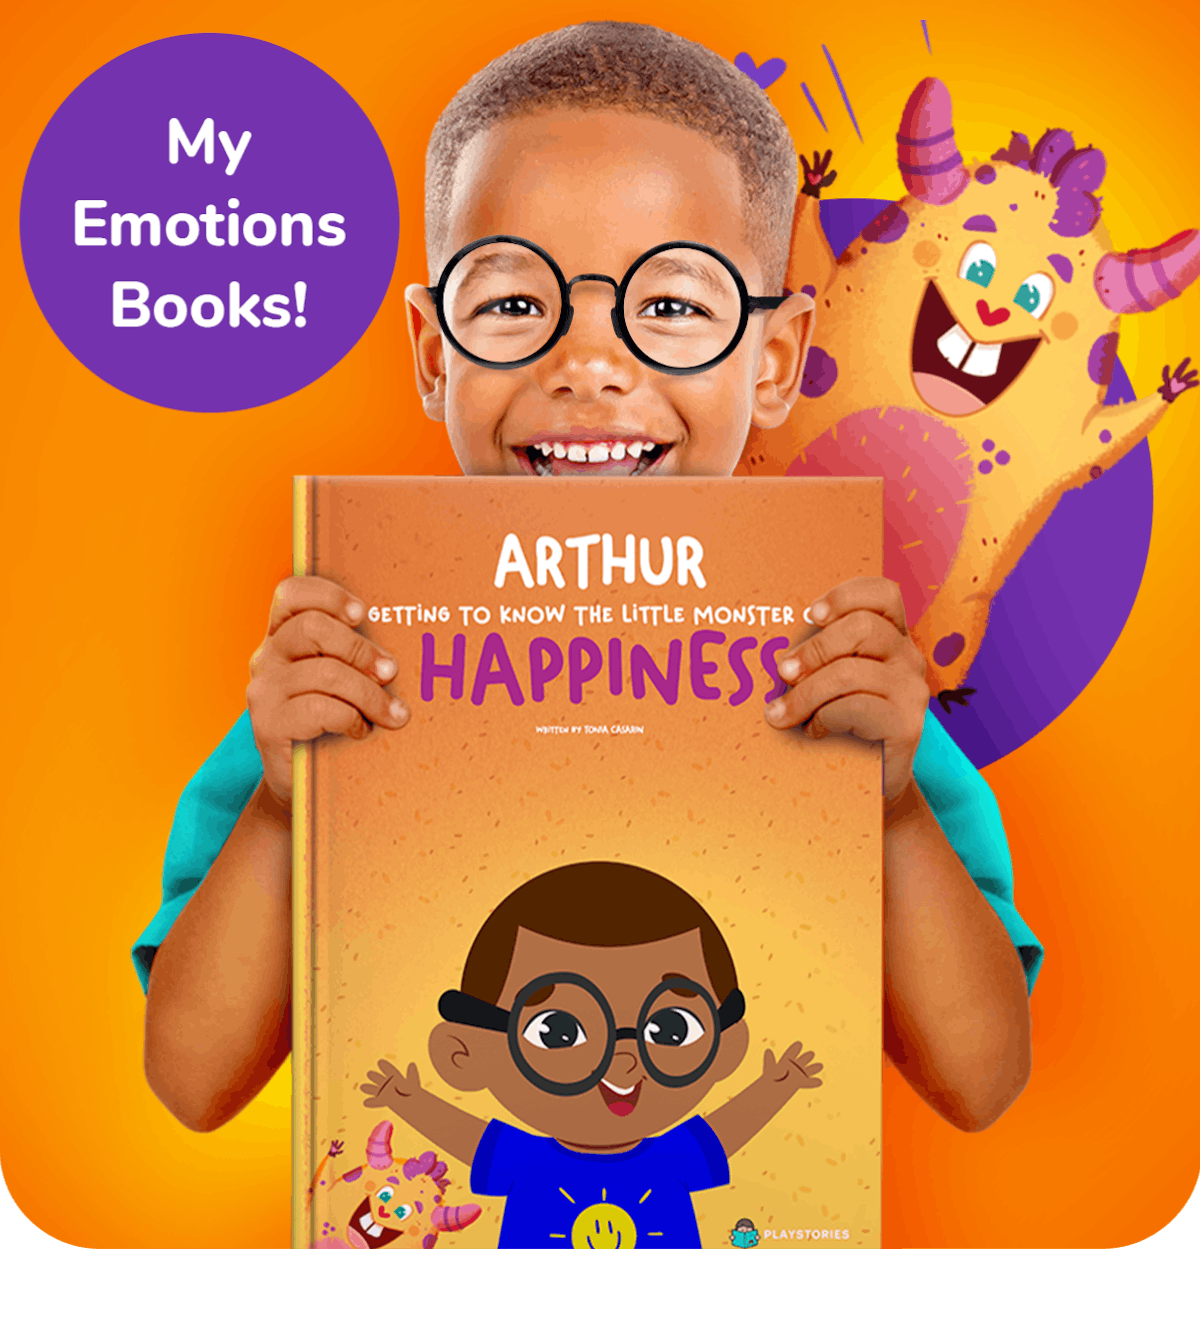 Feelings & Emotions Personalized Books - Playstories